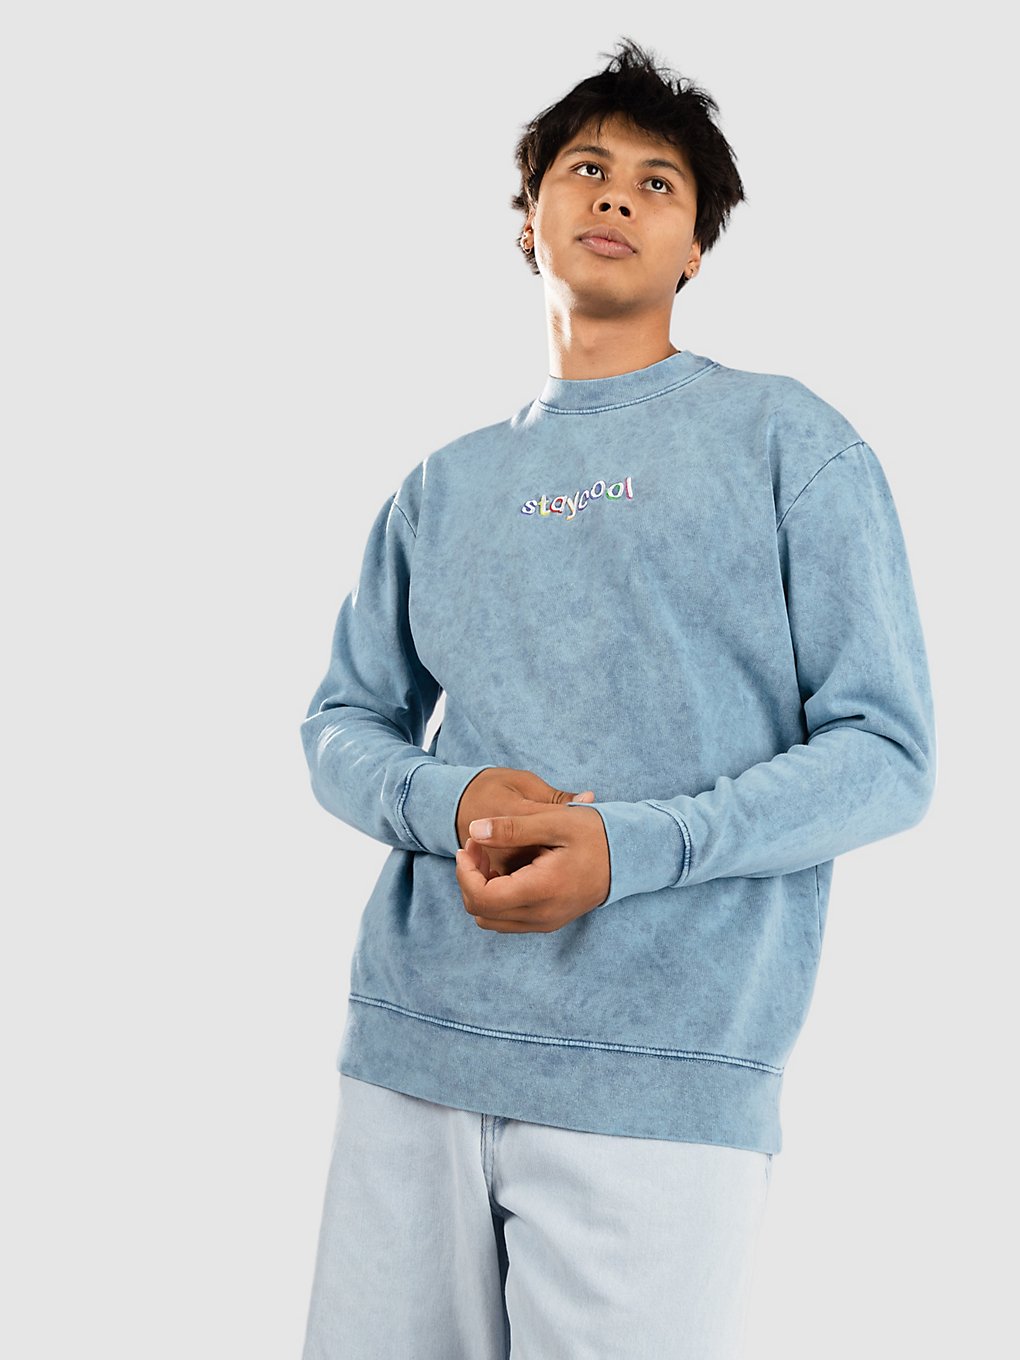 Staycoolnyc Classic Mineral Sweater teal kaufen